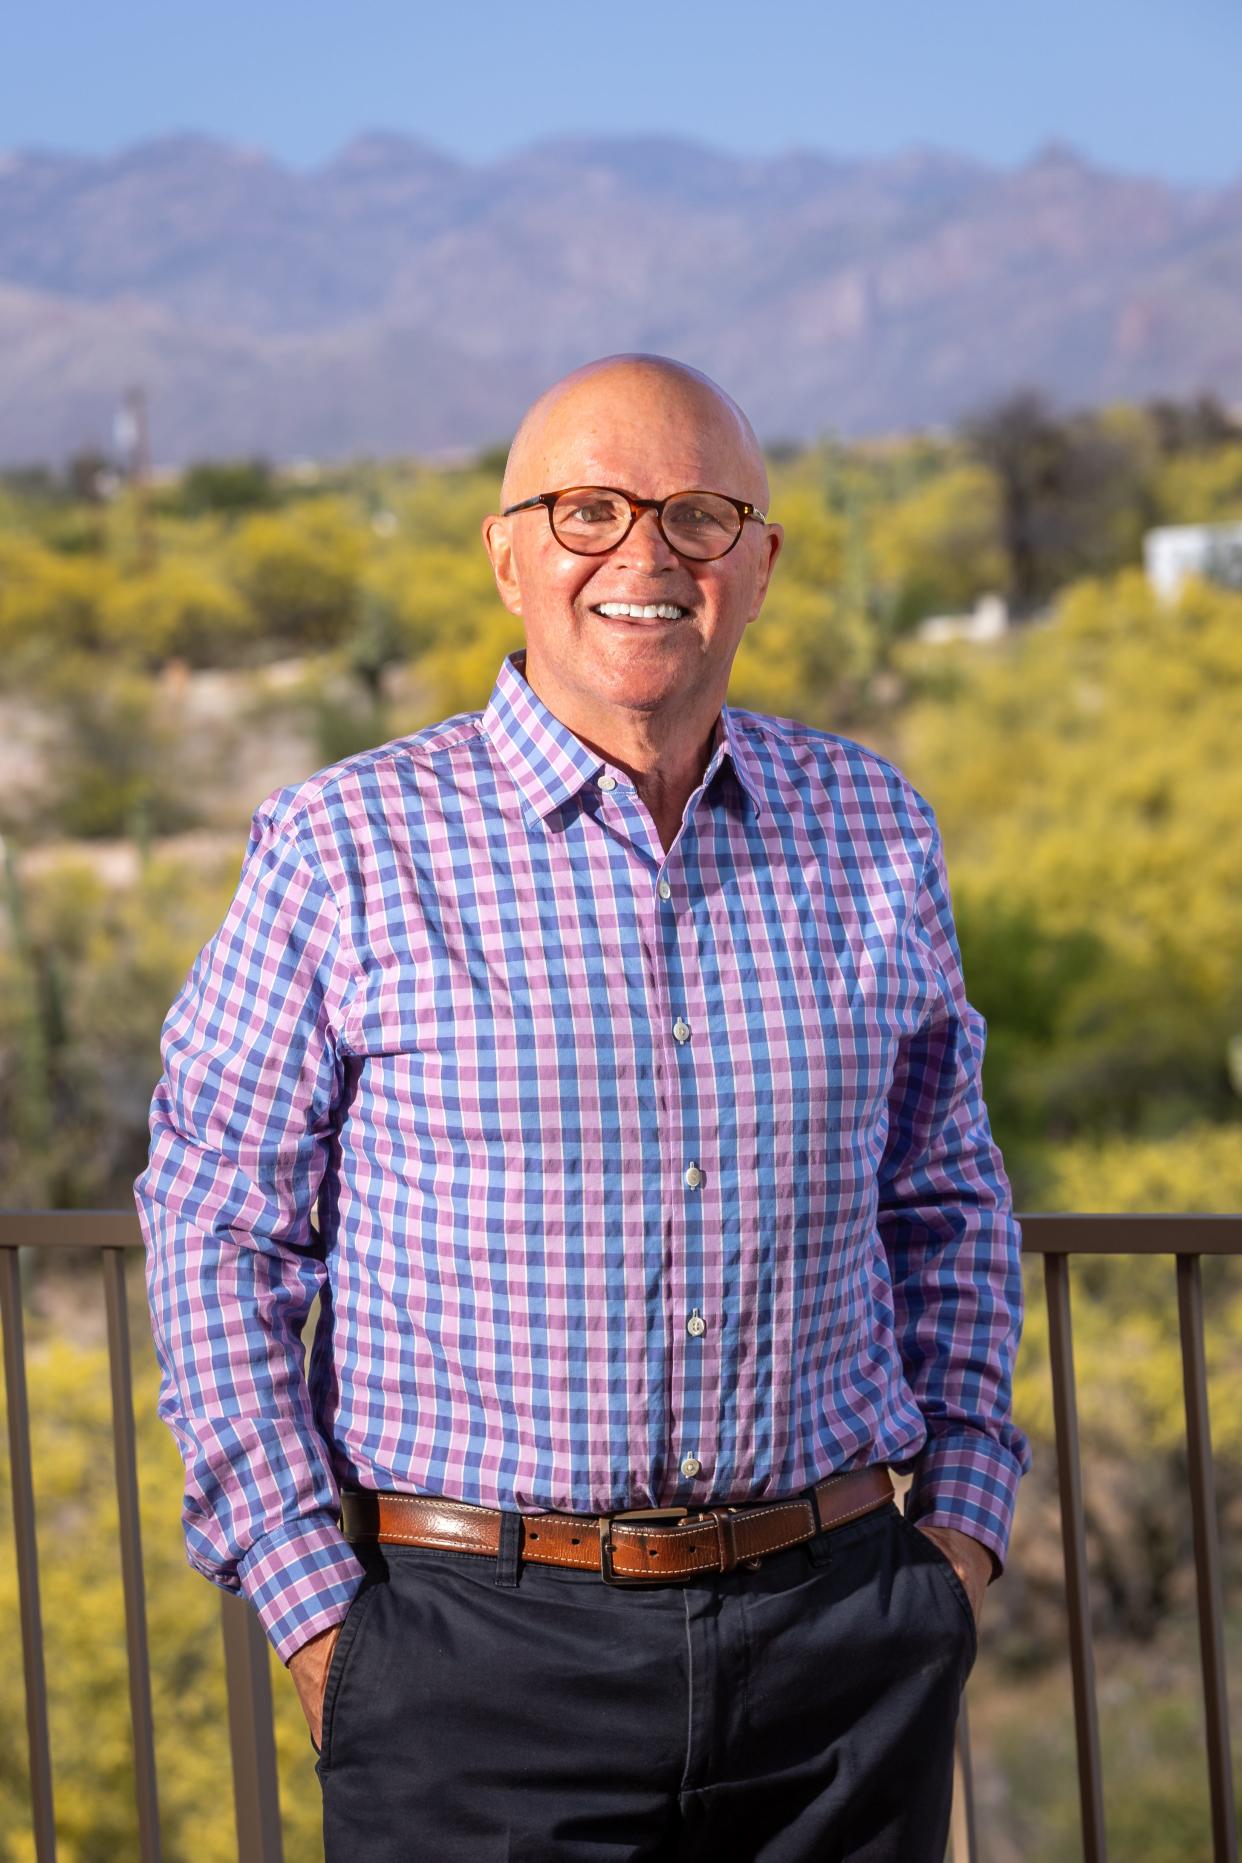 Tucson businessman Jack O’Donnell, who wrote a book about his time working for Donald Trump’s casinos and has been a go-to commentator on the former president’s demeanor, is seeking a southern Arizona congressional seat.